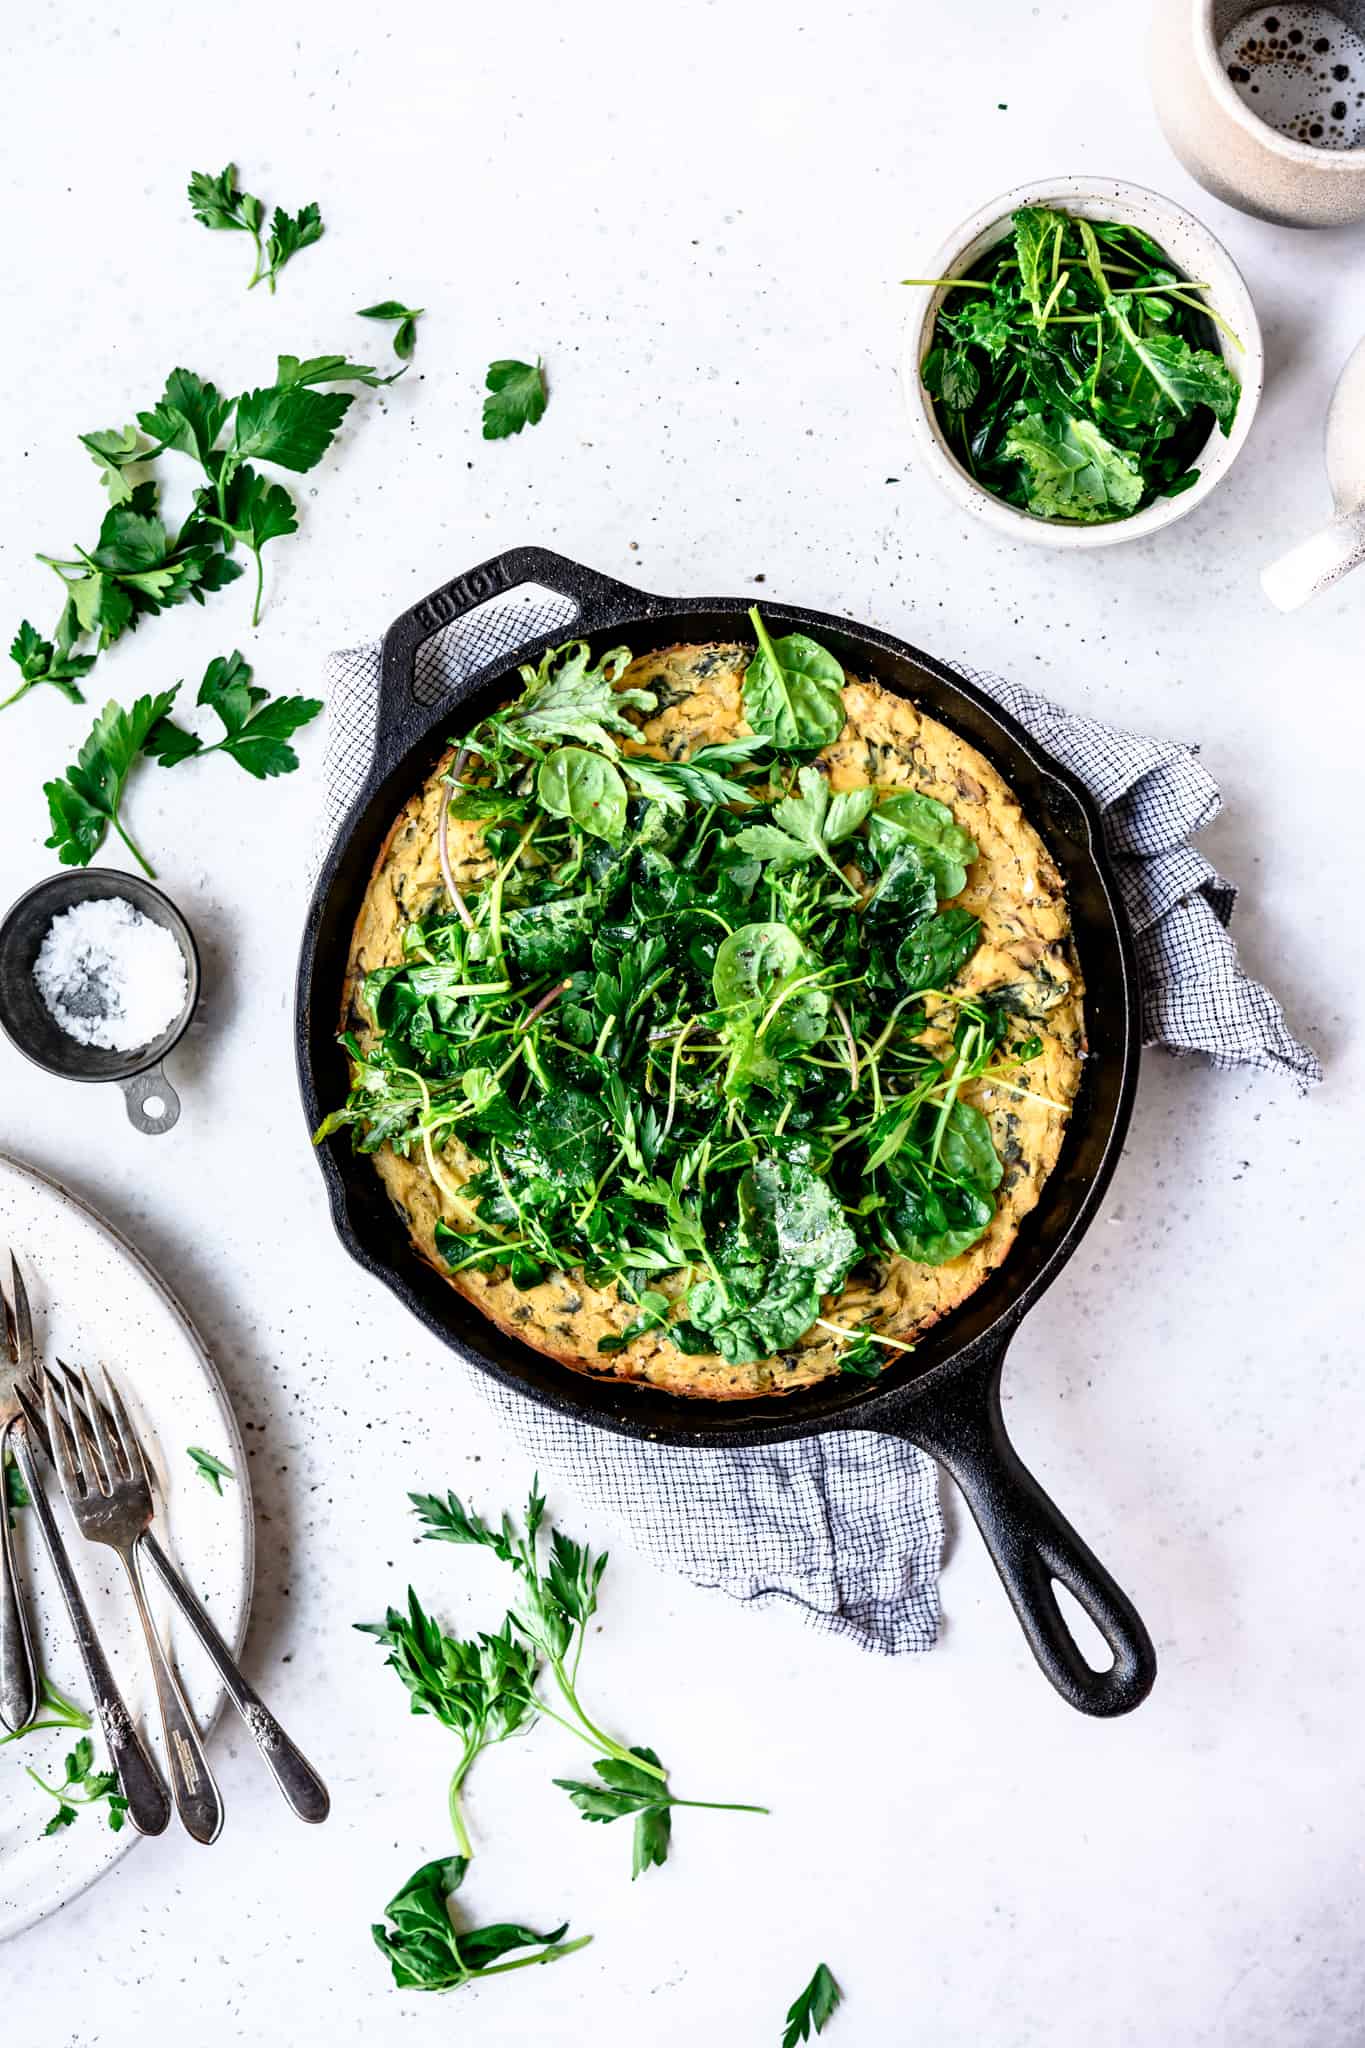 Overhead view of vegan spring vegetable frittata in a cast iron skillet on white background